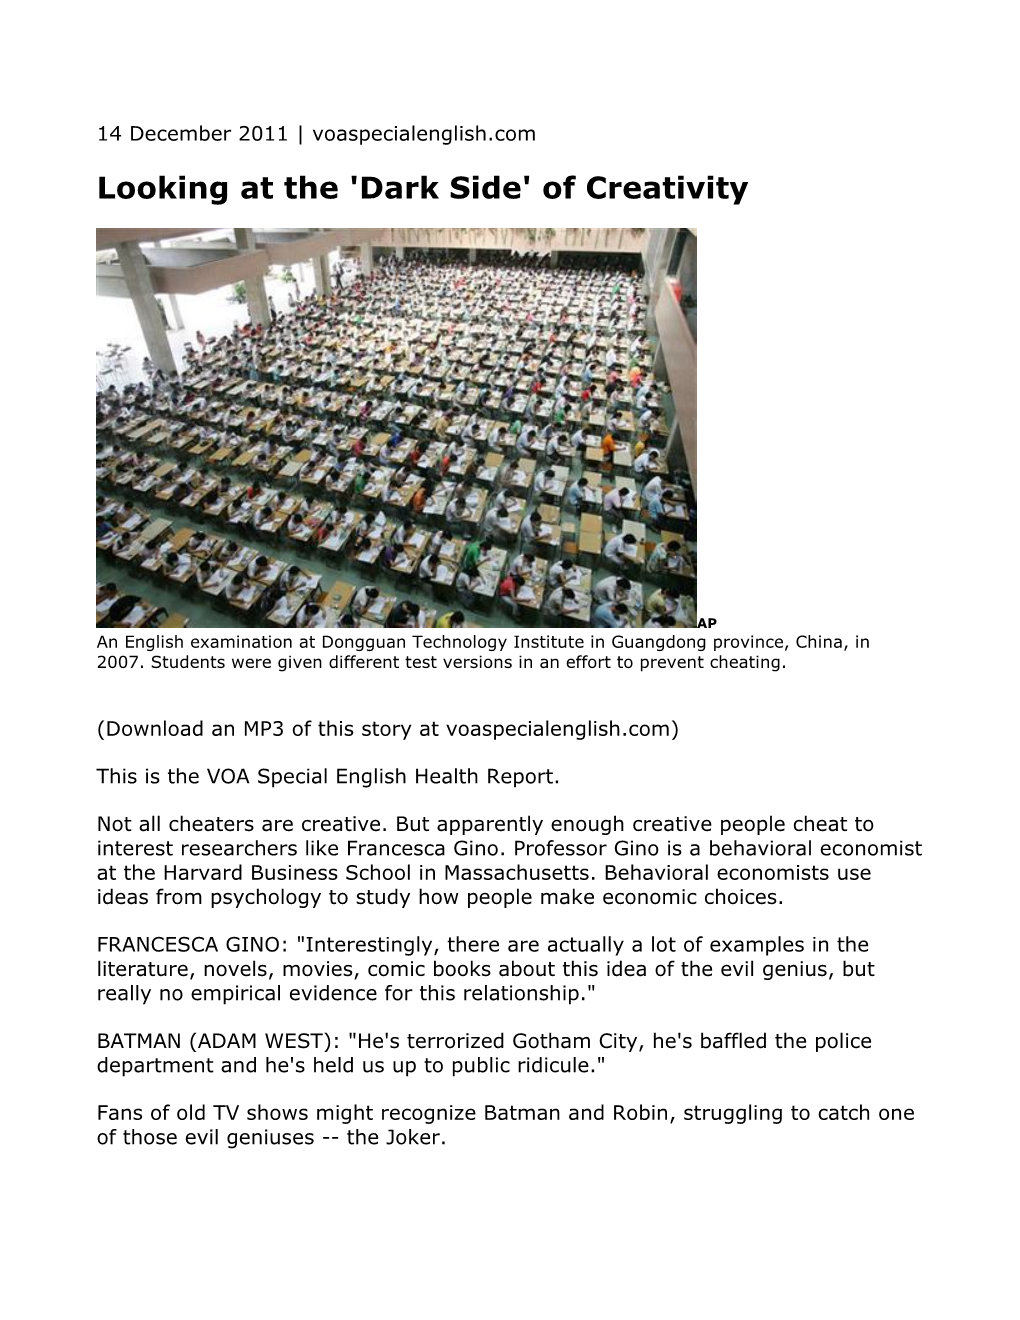 Looking at the 'Dark Side' of Creativity